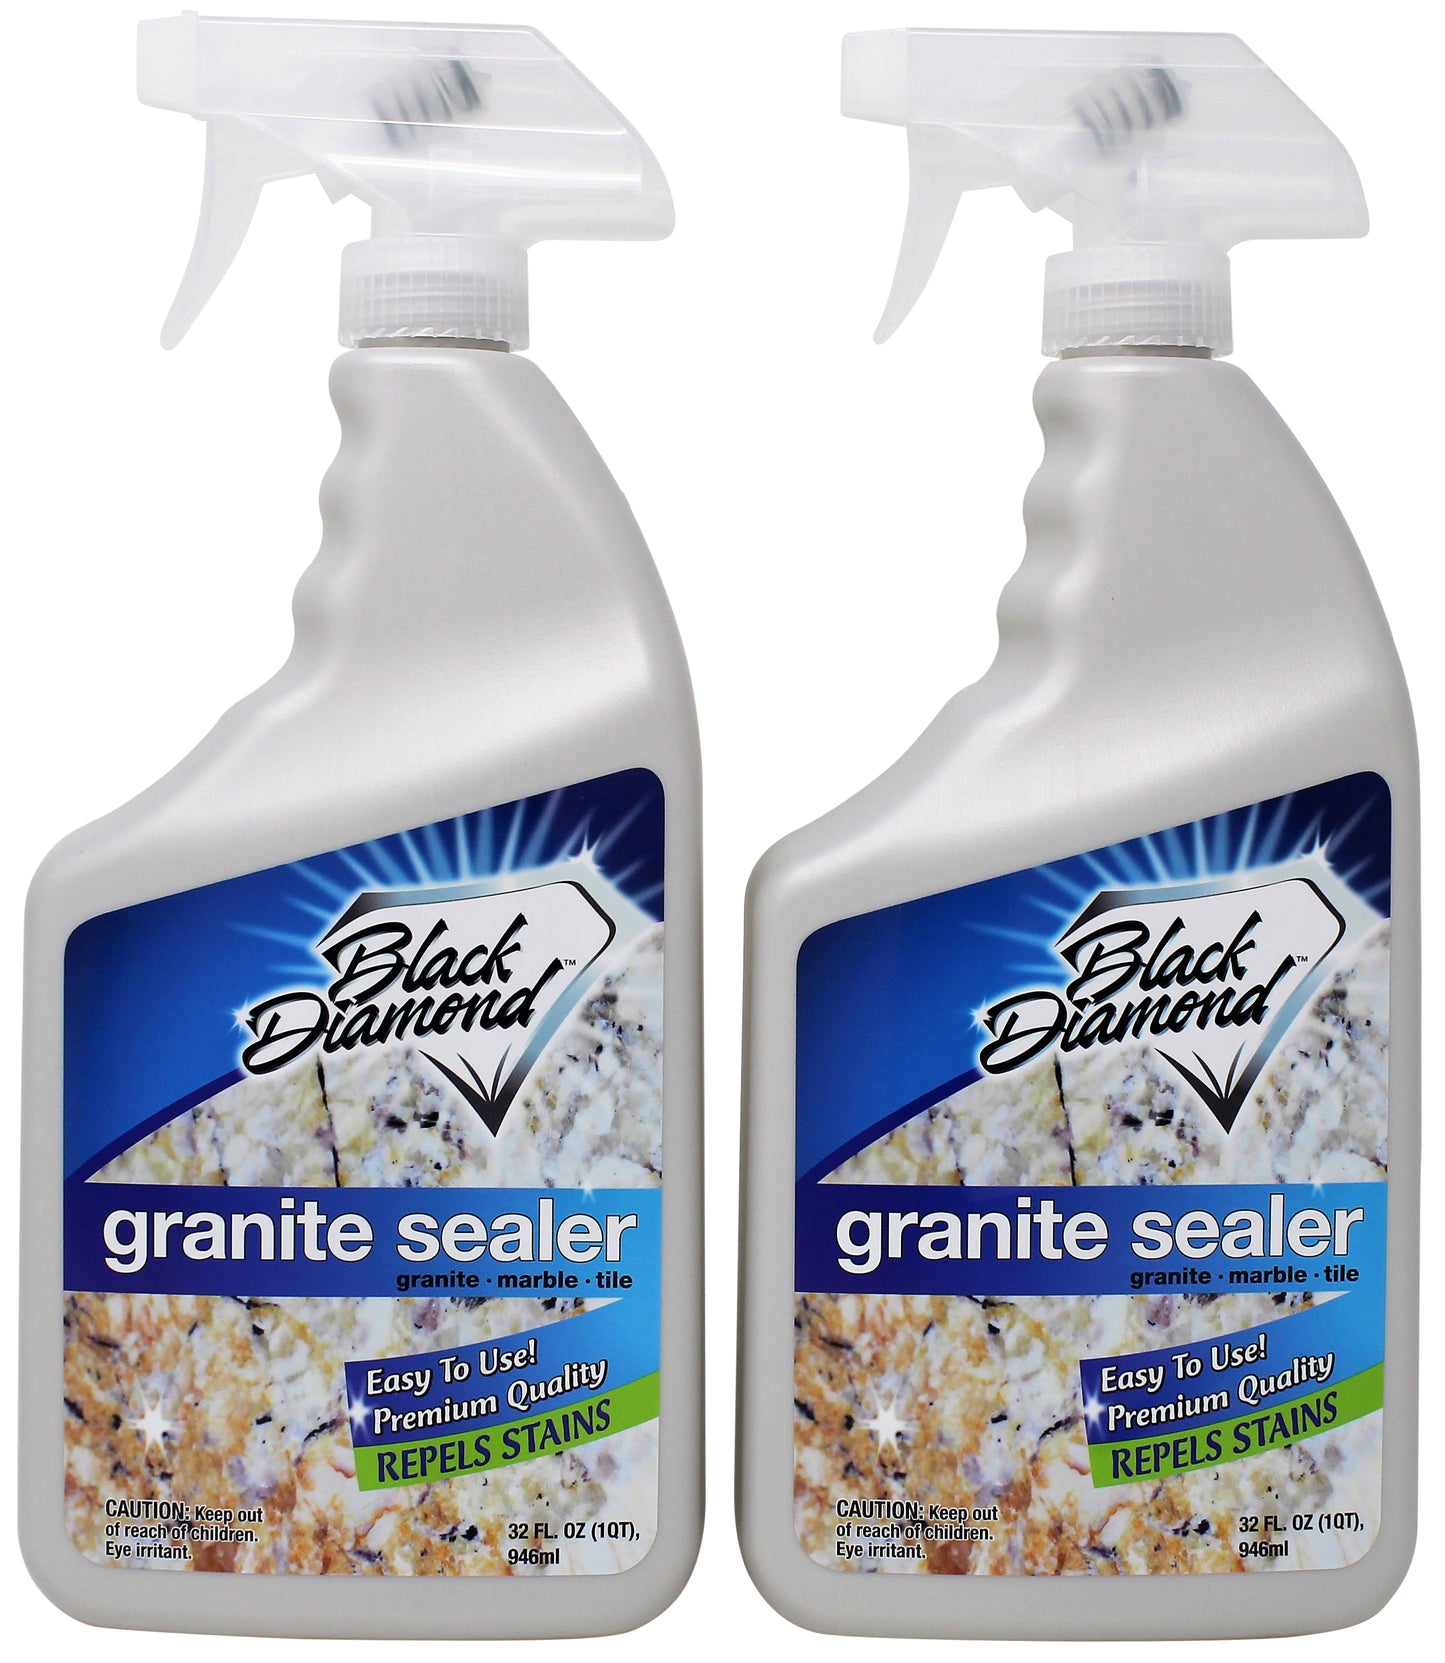 Black Diamond Stoneworks GRANITE SEALER: Seals and Protects, Granite, Marble, Travertine, Limestone and Concrete Counter Tops. Works Great On Grout, Fireplaces and Patios.